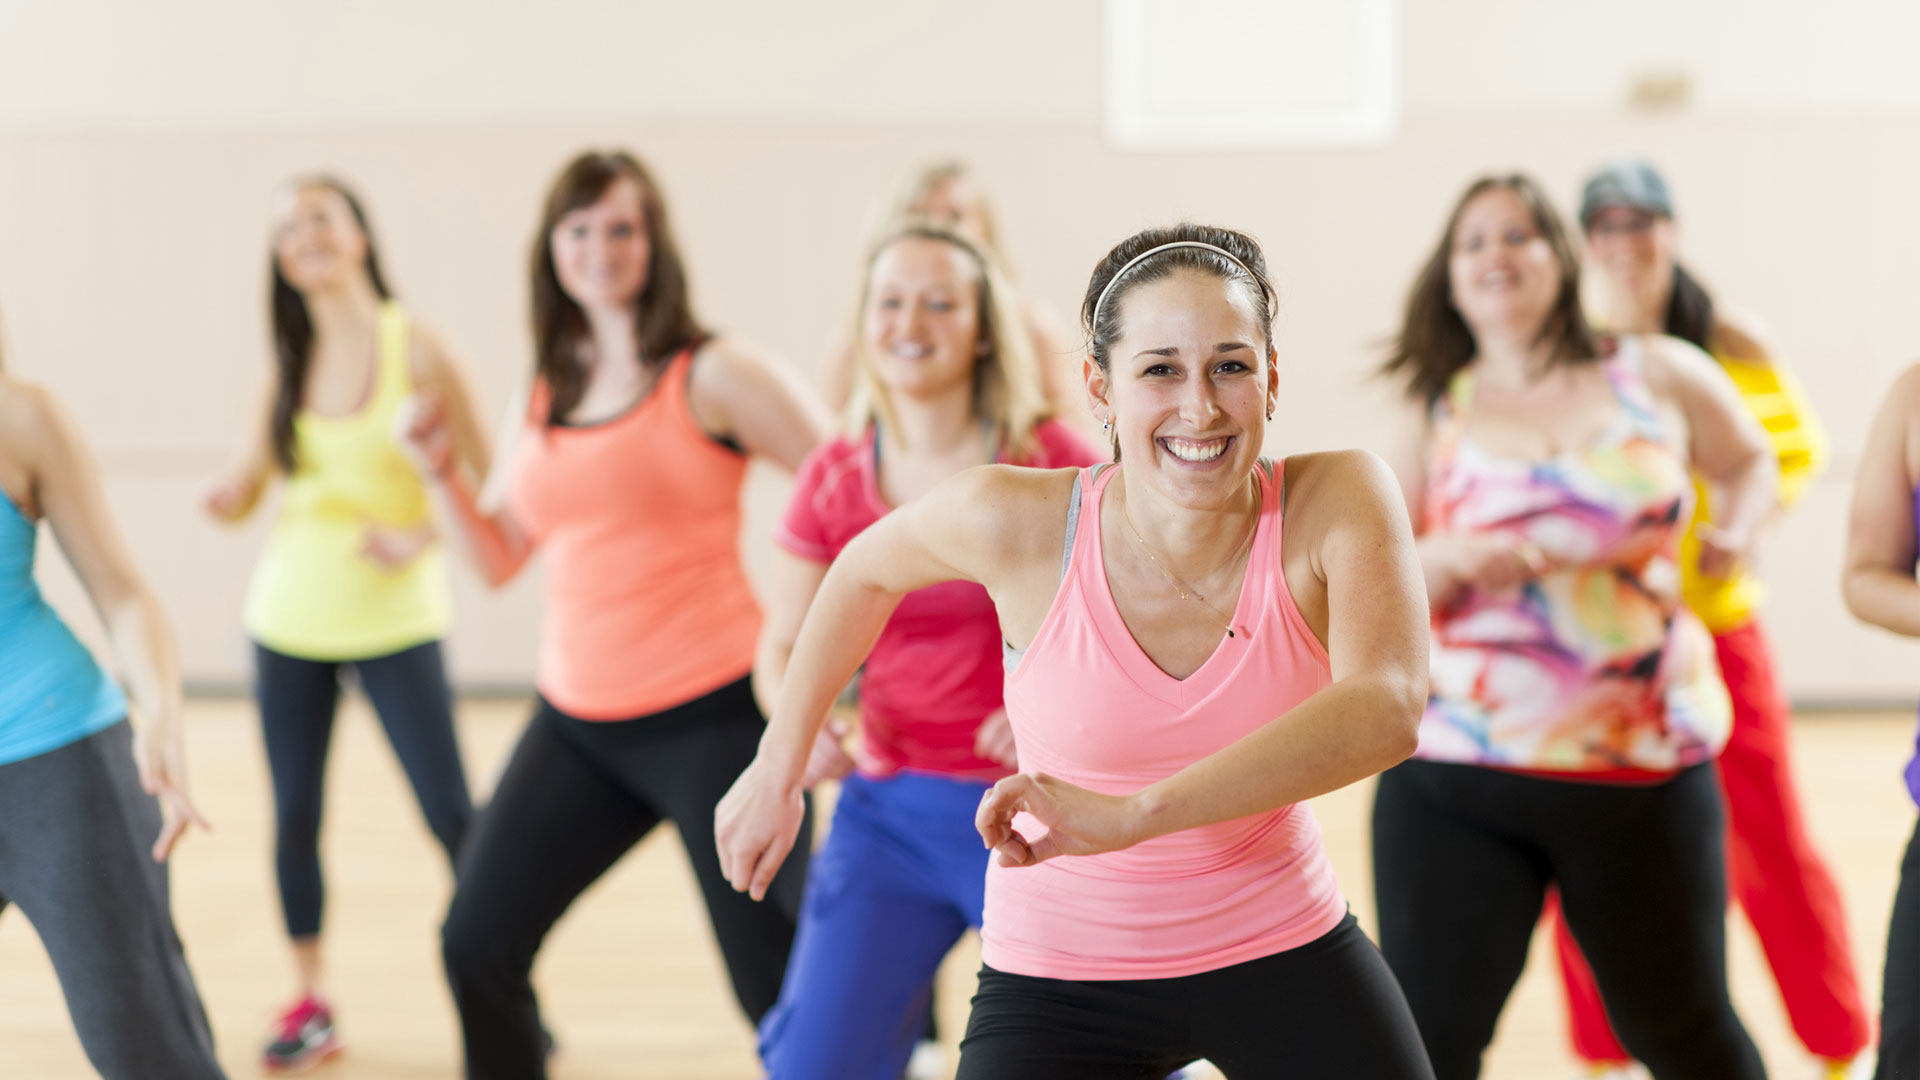 can dance workouts help you lose weight? image shows women dancing for fitness